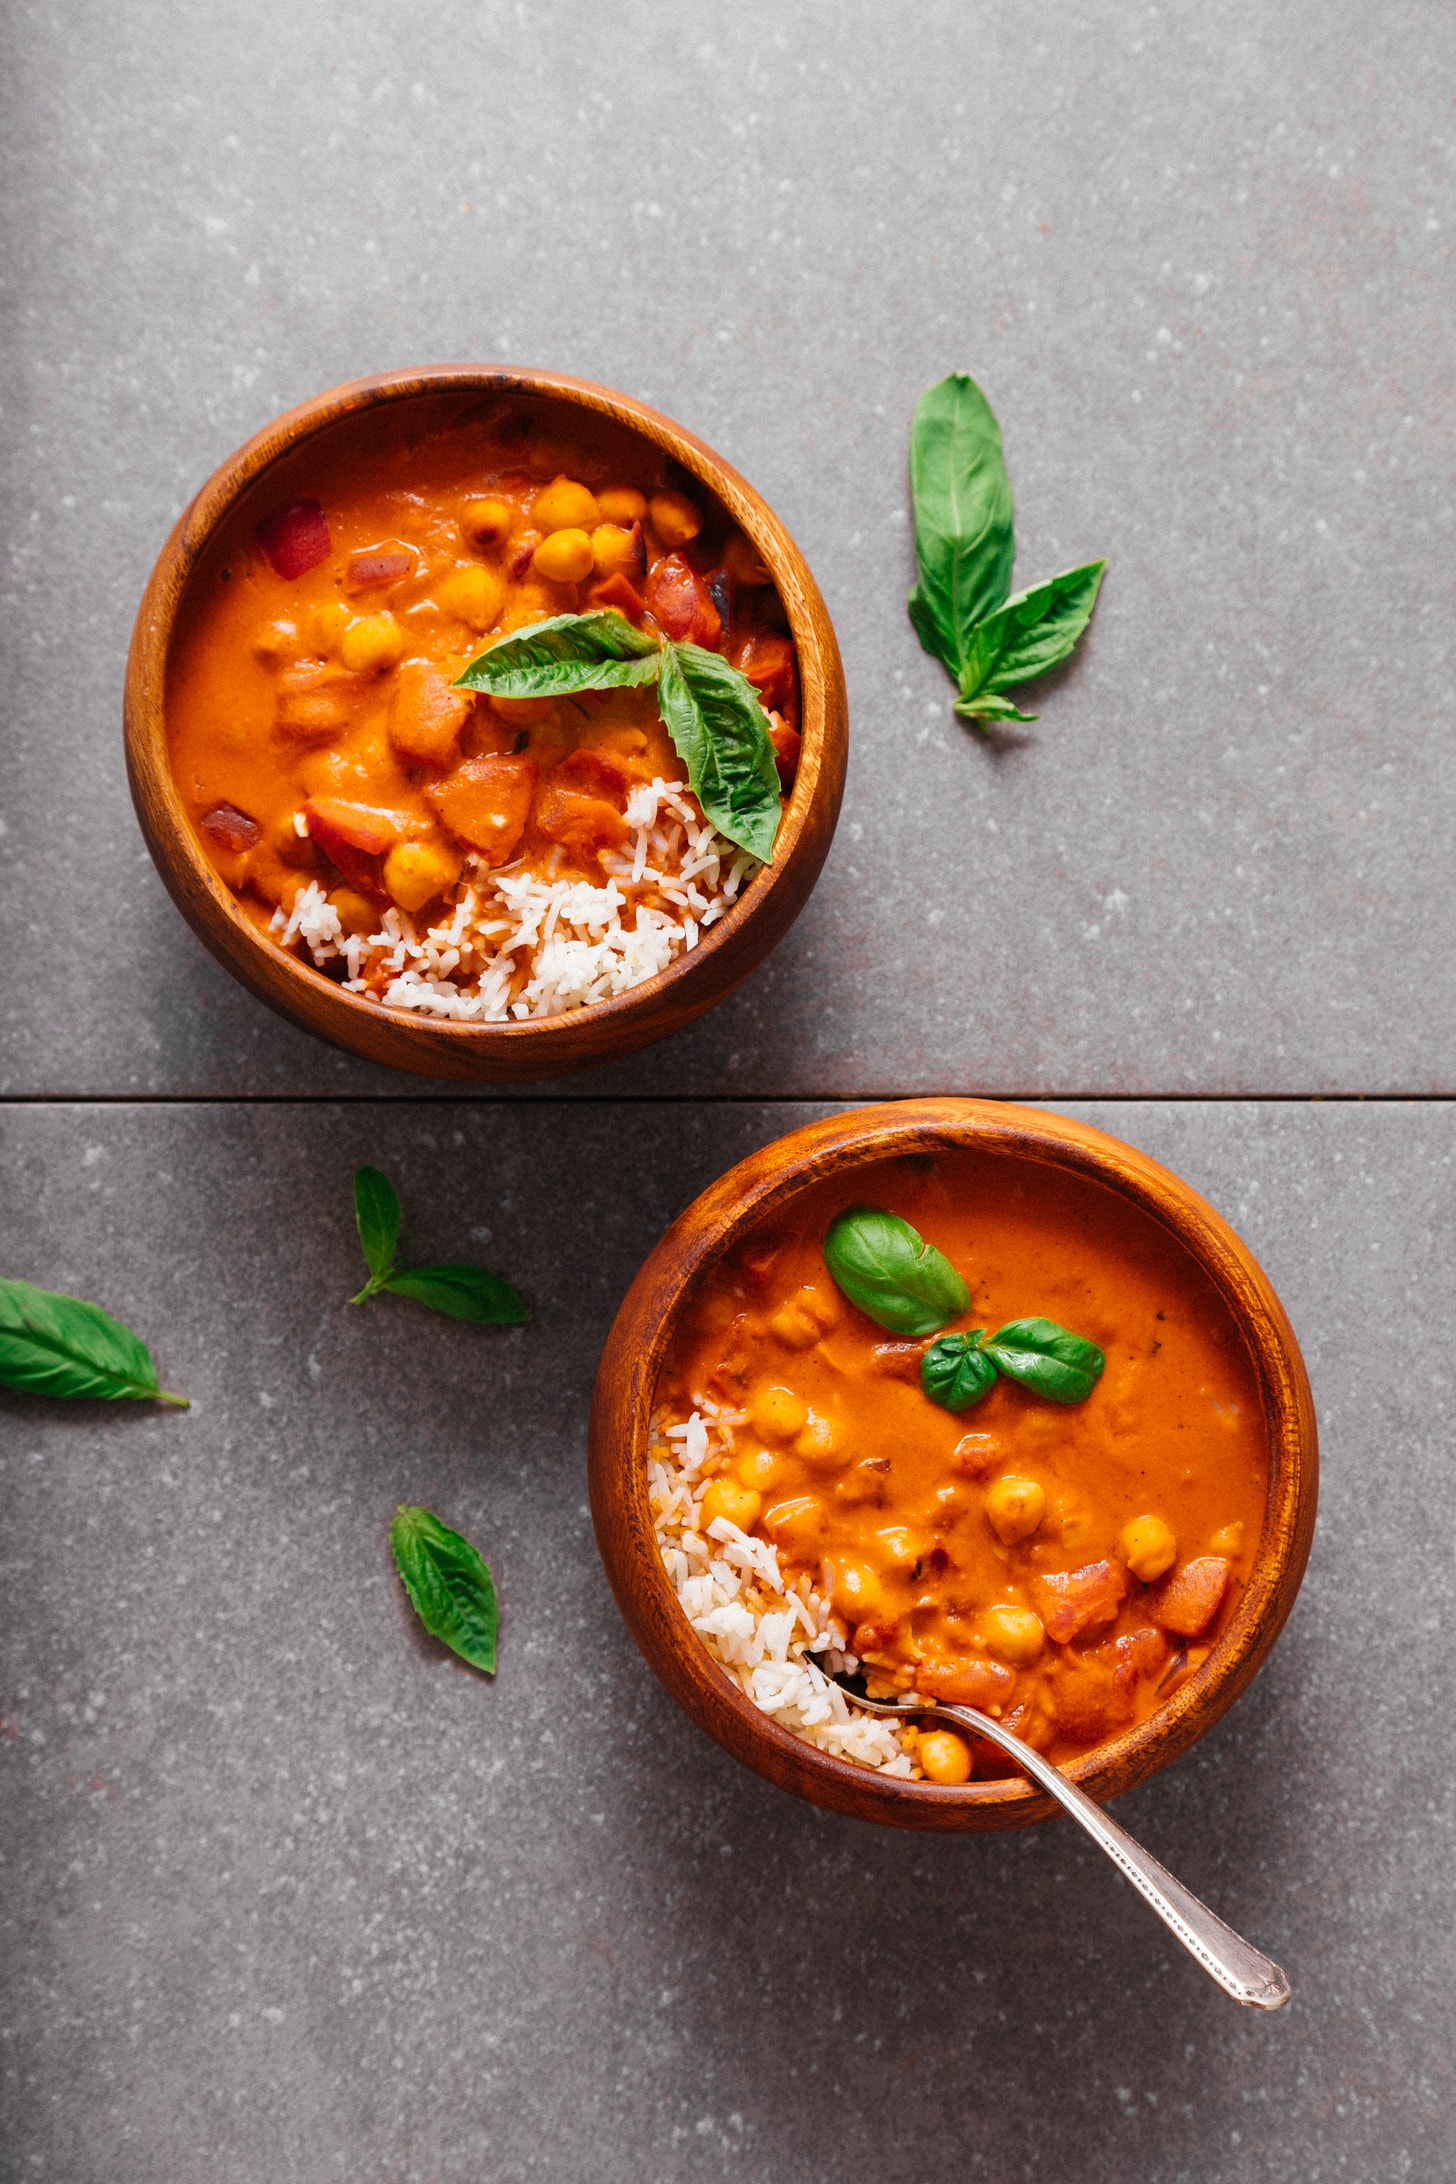 Two bowls of rice beside our Creamy Chickpea Tomato Peanut Stew recipe